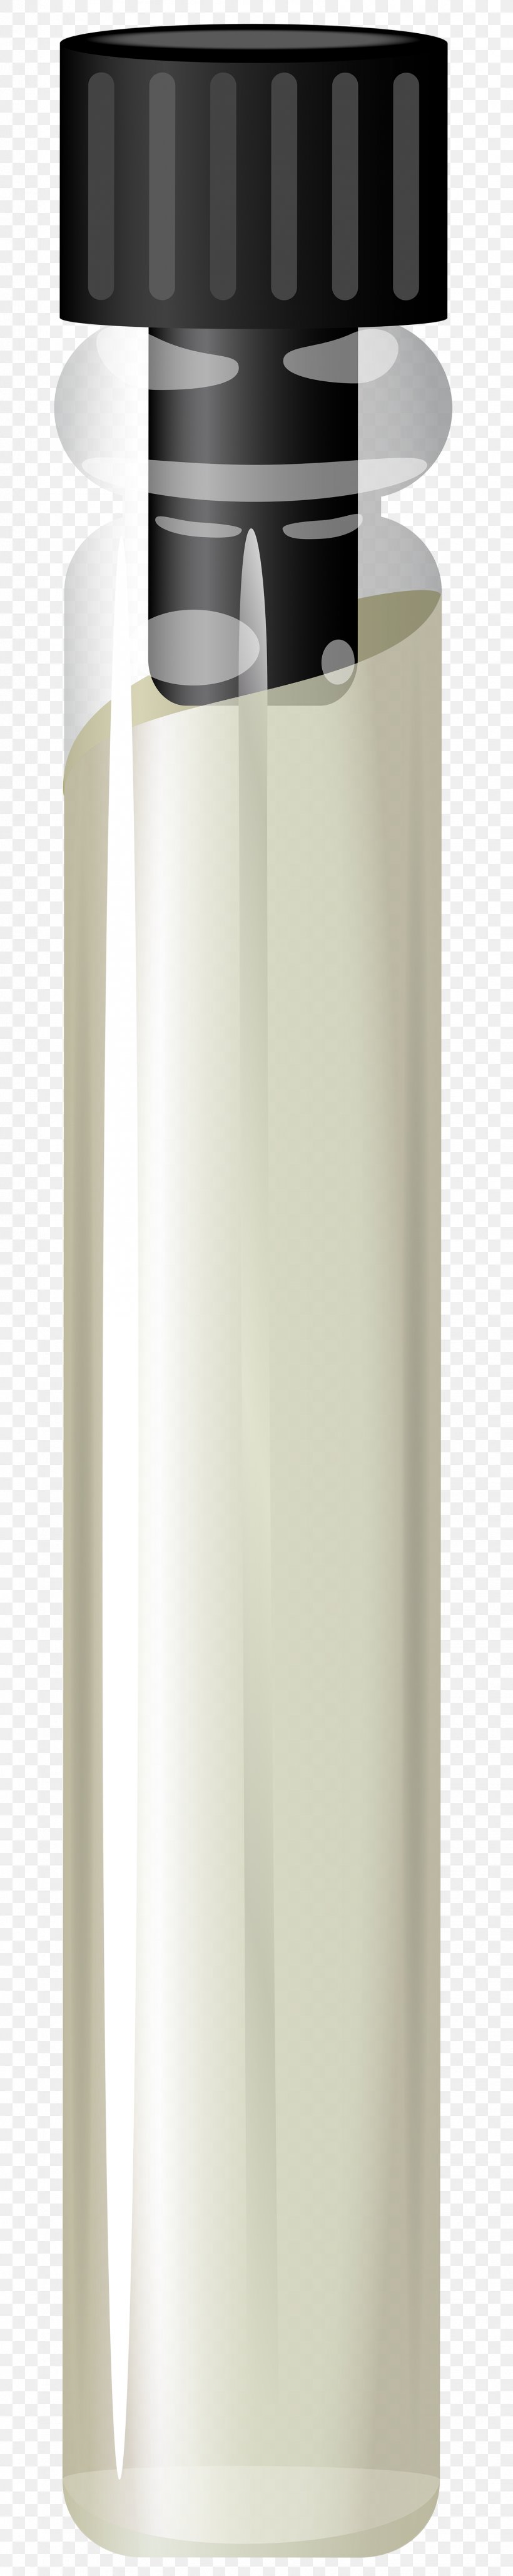 Vial Clip Art, PNG, 1594x8000px, Vial, Bottle, Drinkware, Glass, Image Resolution Download Free